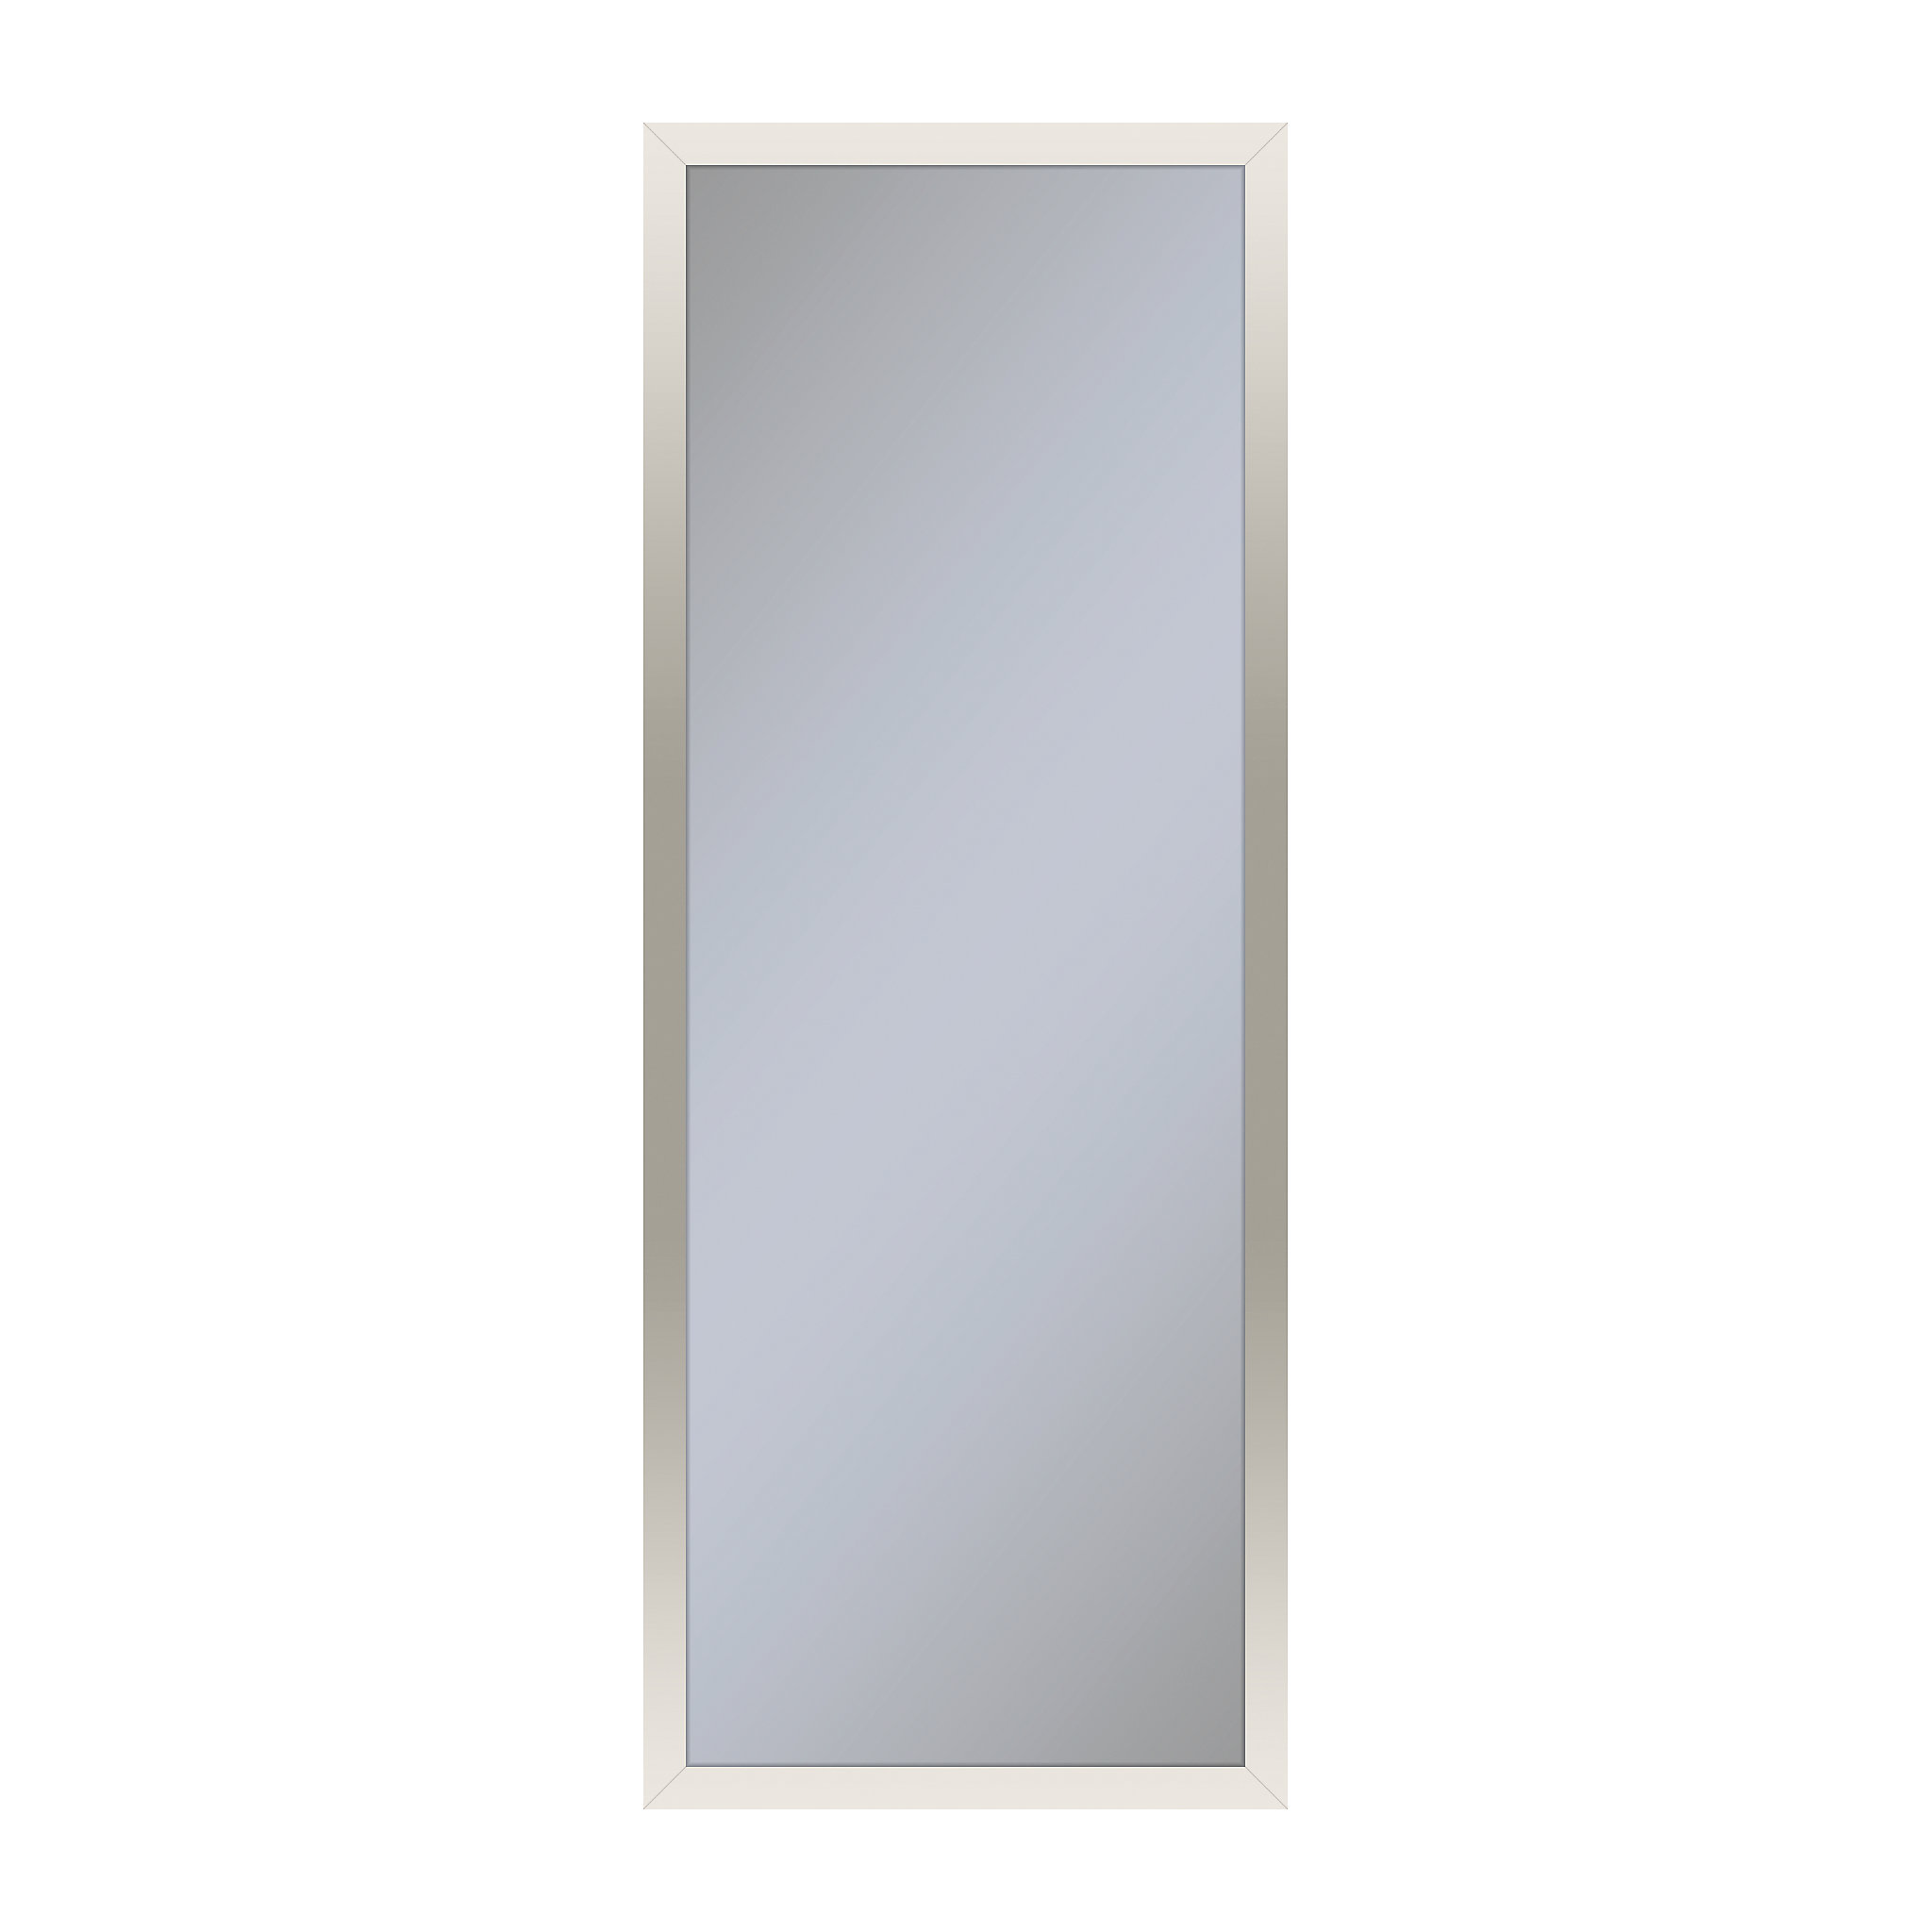 Robern PC1230D6TNN77 Profiles Framed Cabinet, 12" x 30" x 6", Polished Nickel, Non-Electric, Reversible Hinge